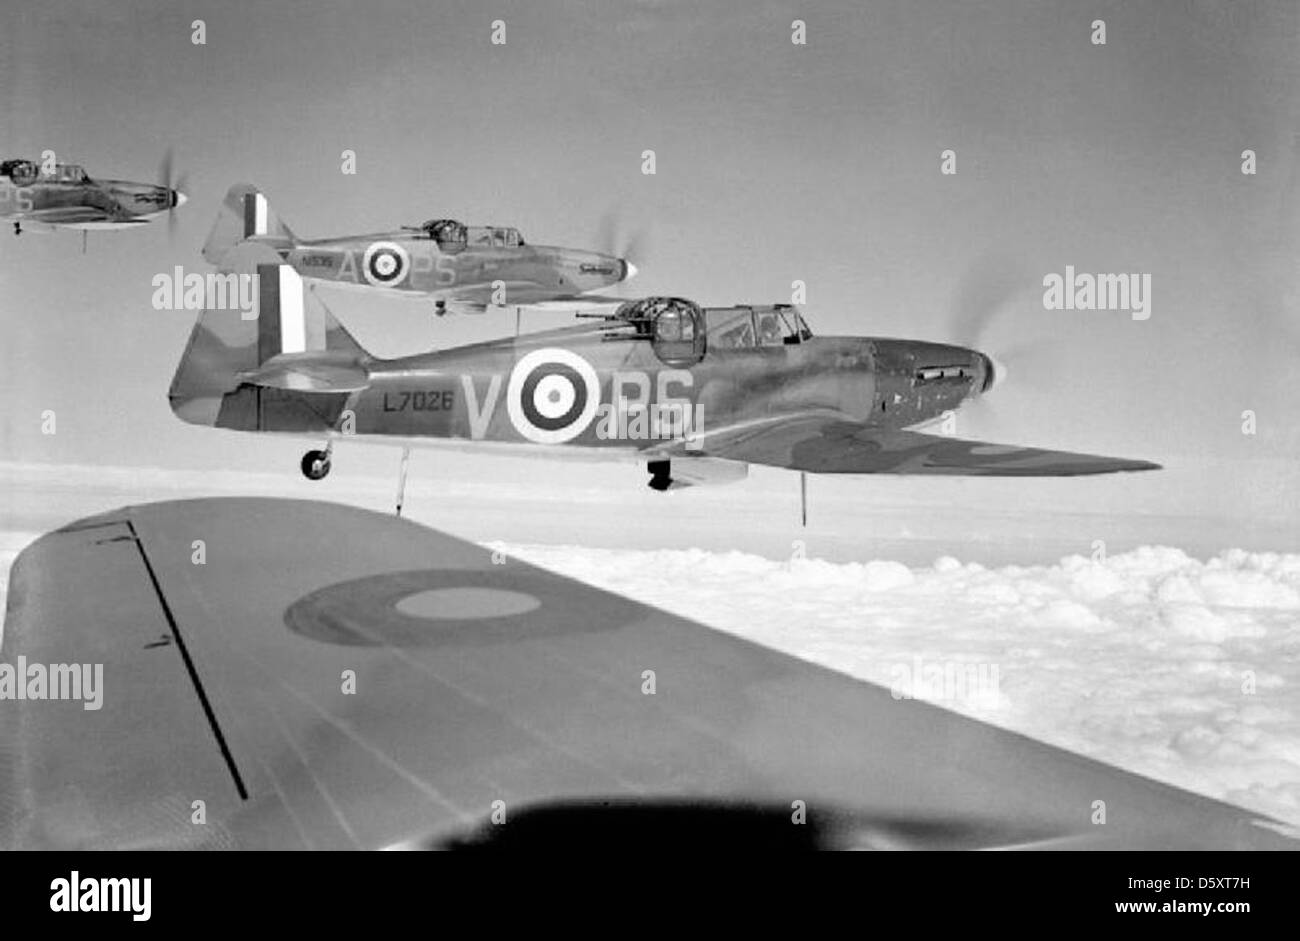 RAF Boulton Paul 'Defiant Mk Is' of No. 264 Squadron RAF (including L7026 PS-V and N1535 PS-A) based at Kirton-in-Lindsey, Lincolnshire, August 1940. Stock Photo